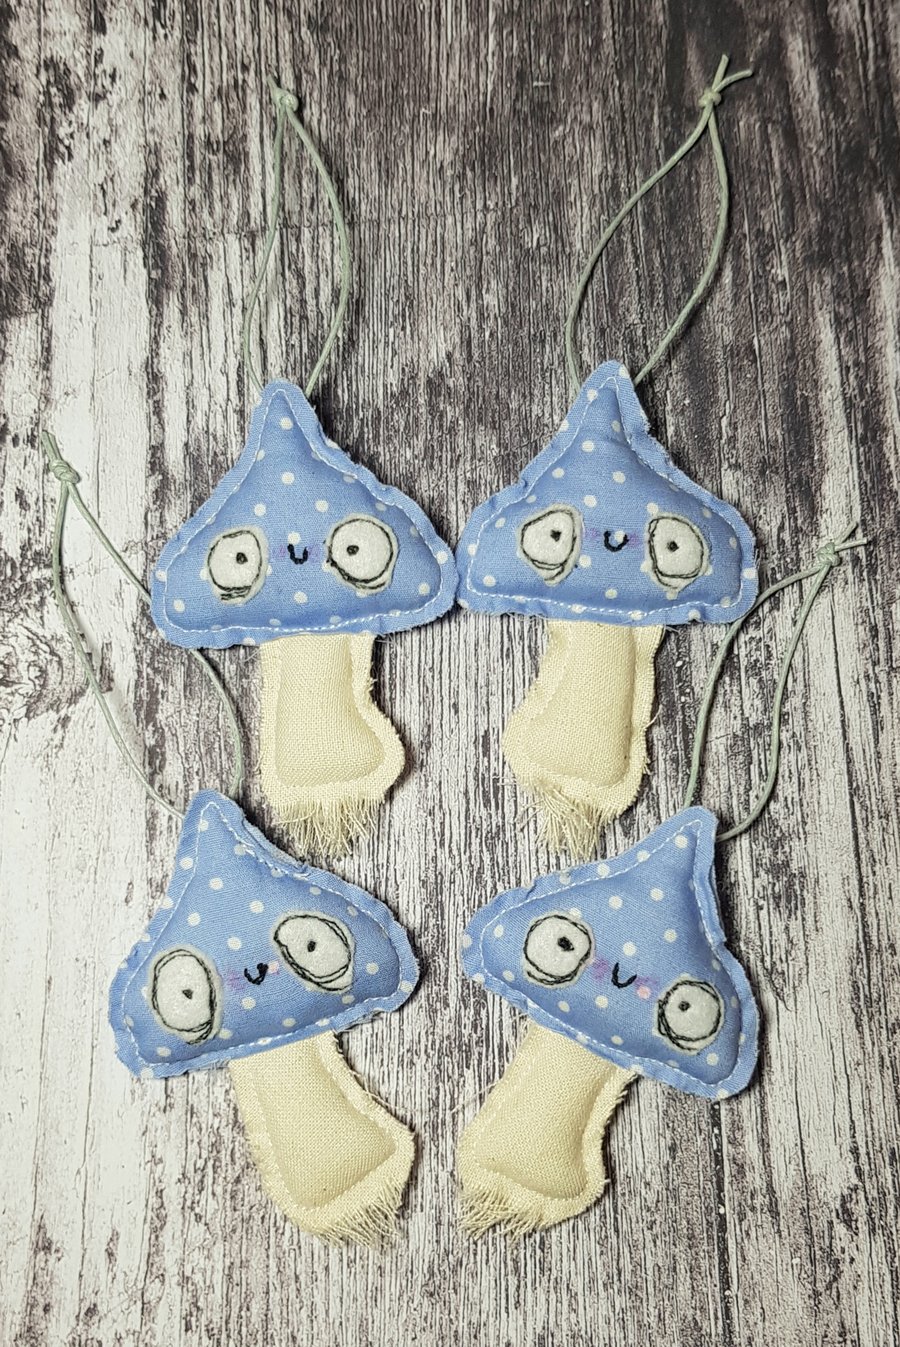 Quirky Mushroom Hangers in Blue & White Dot Print